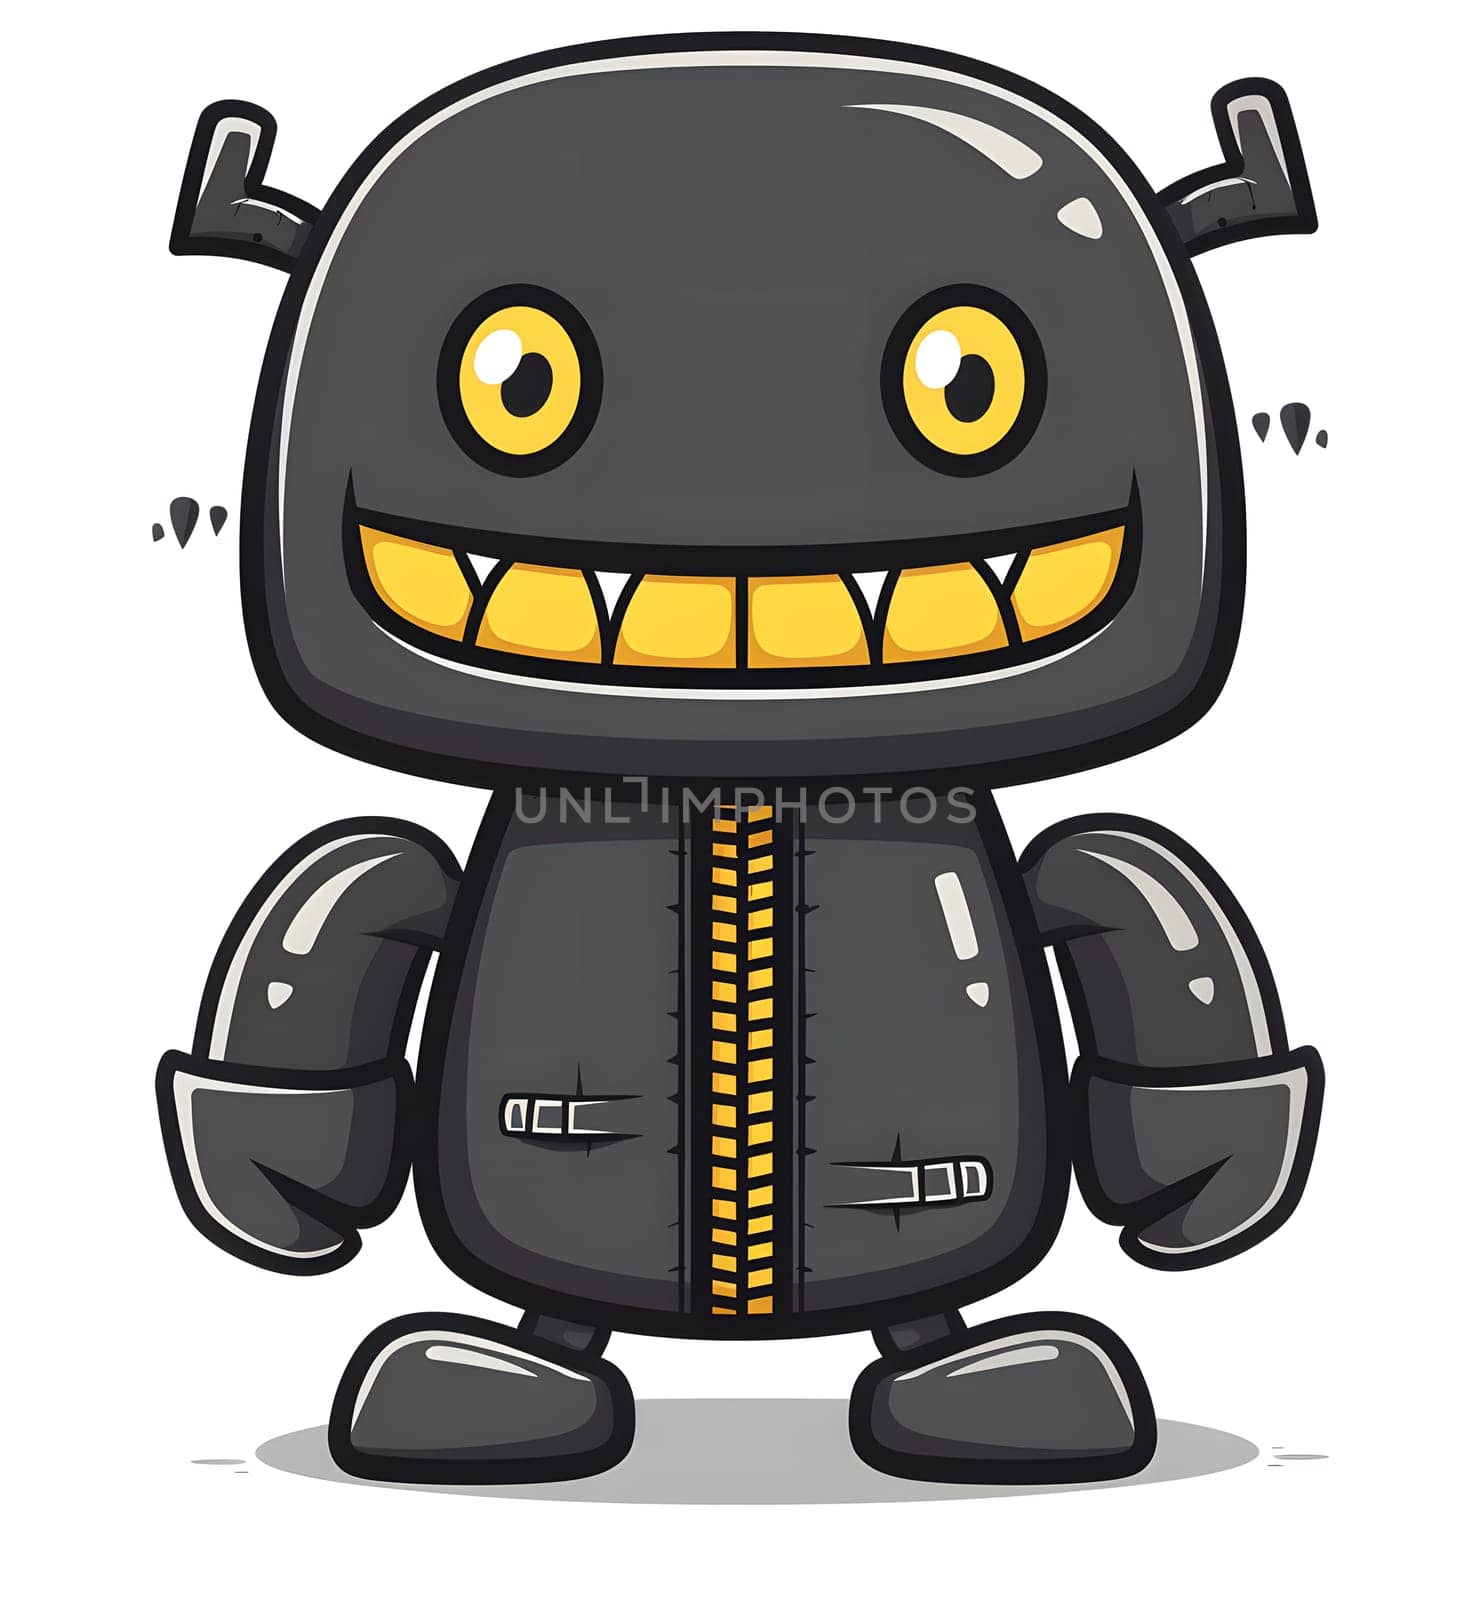 A cartoon illustration of a black robot with yellow eyes and teeth by Nadtochiy